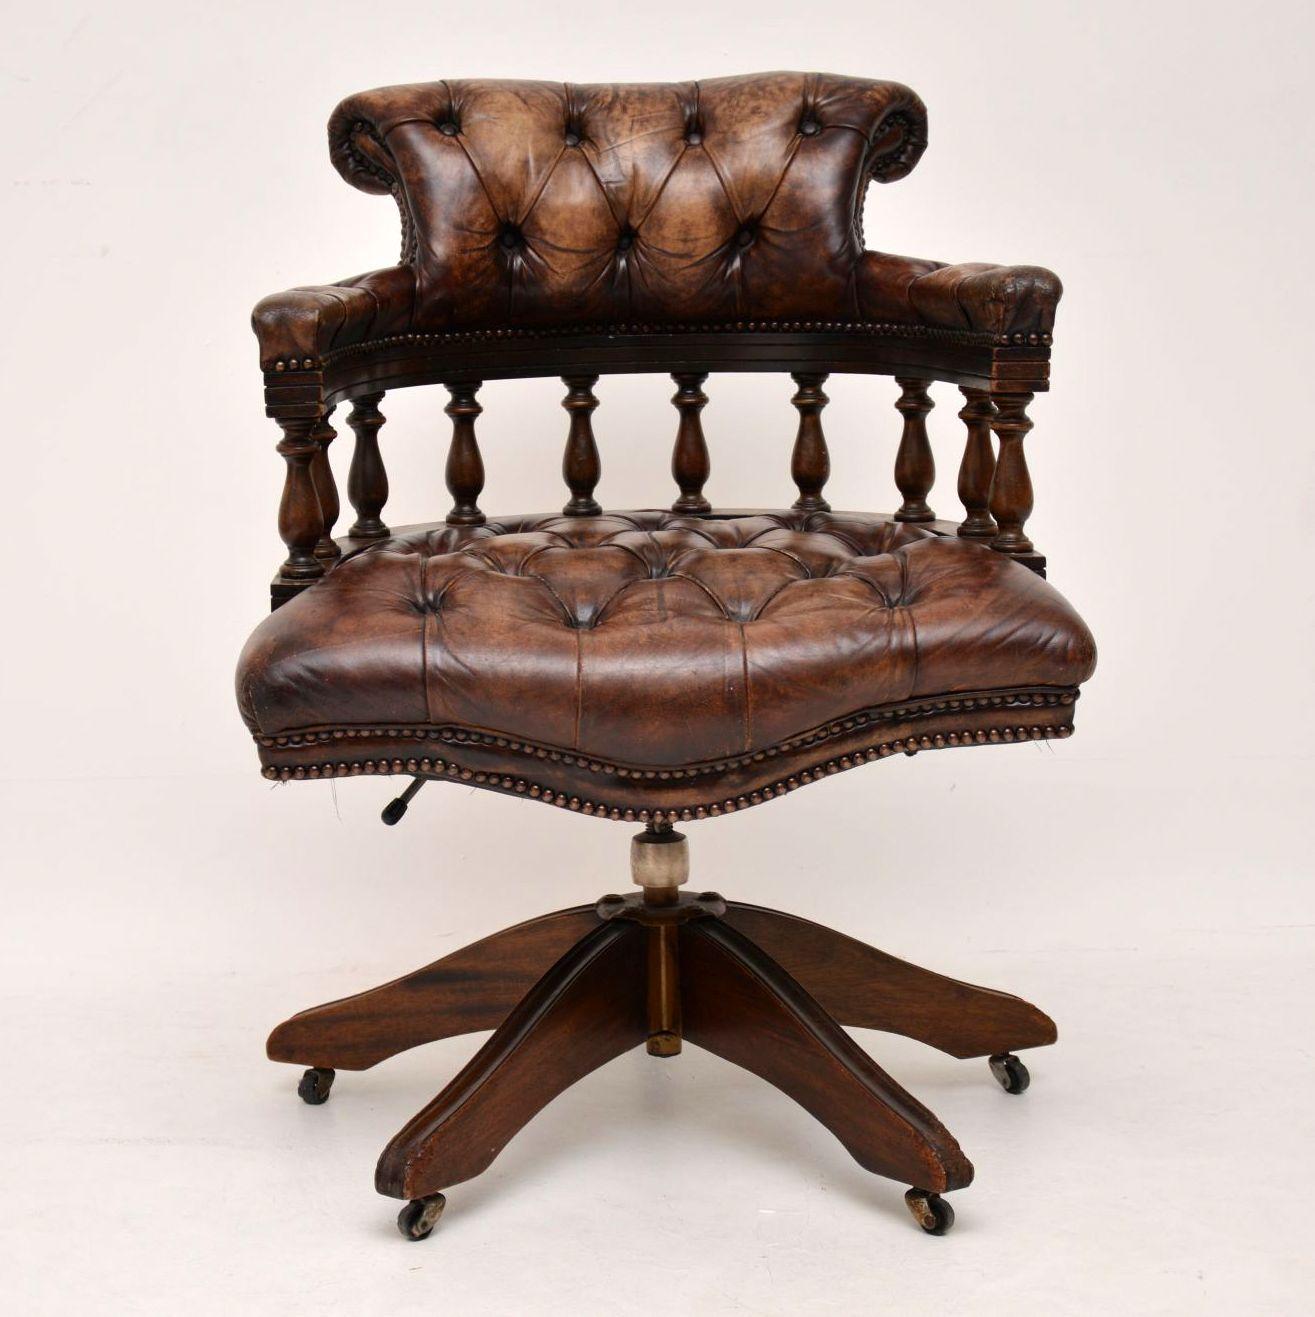 Antique deep buttoned leather mahogany desk chair in good original condition & full of character. The leather has a fabulous original look & a wonderful colour, with natural fading & distressing. This desk chair is very comfortable too because of